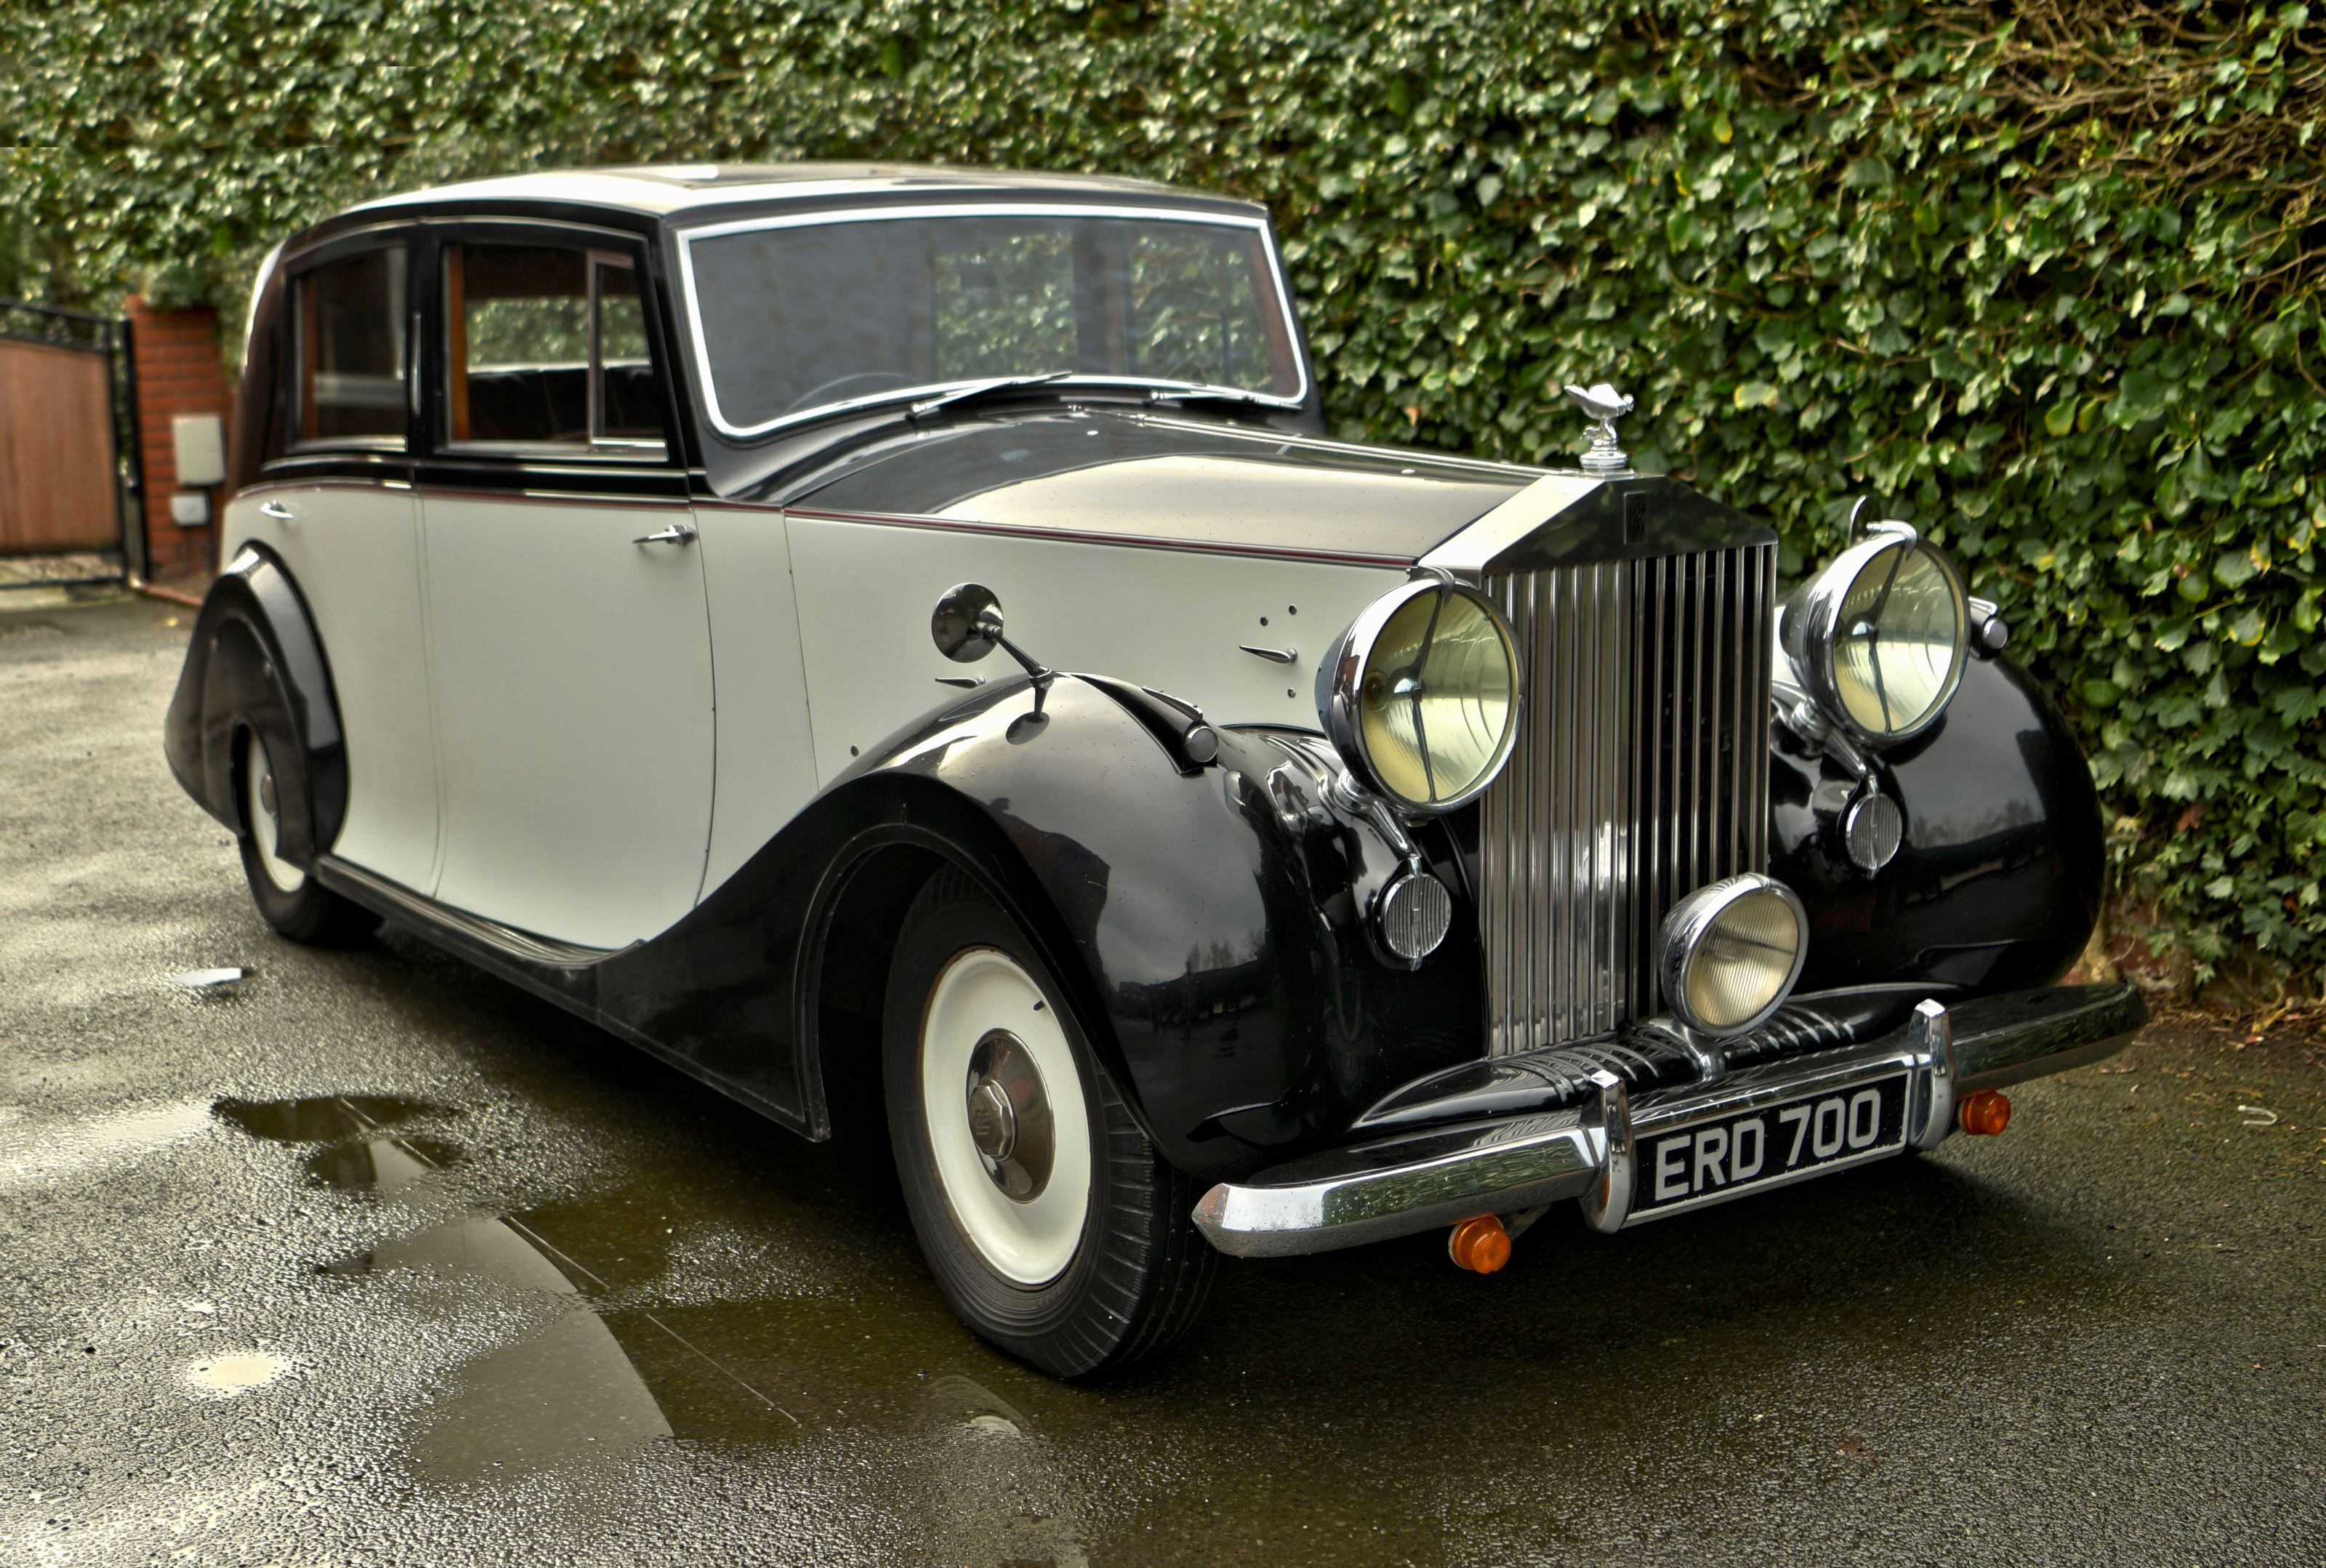 Rolls royce  silver wraith by vincents of reading  wc6cmt jg8dz9iitvioax